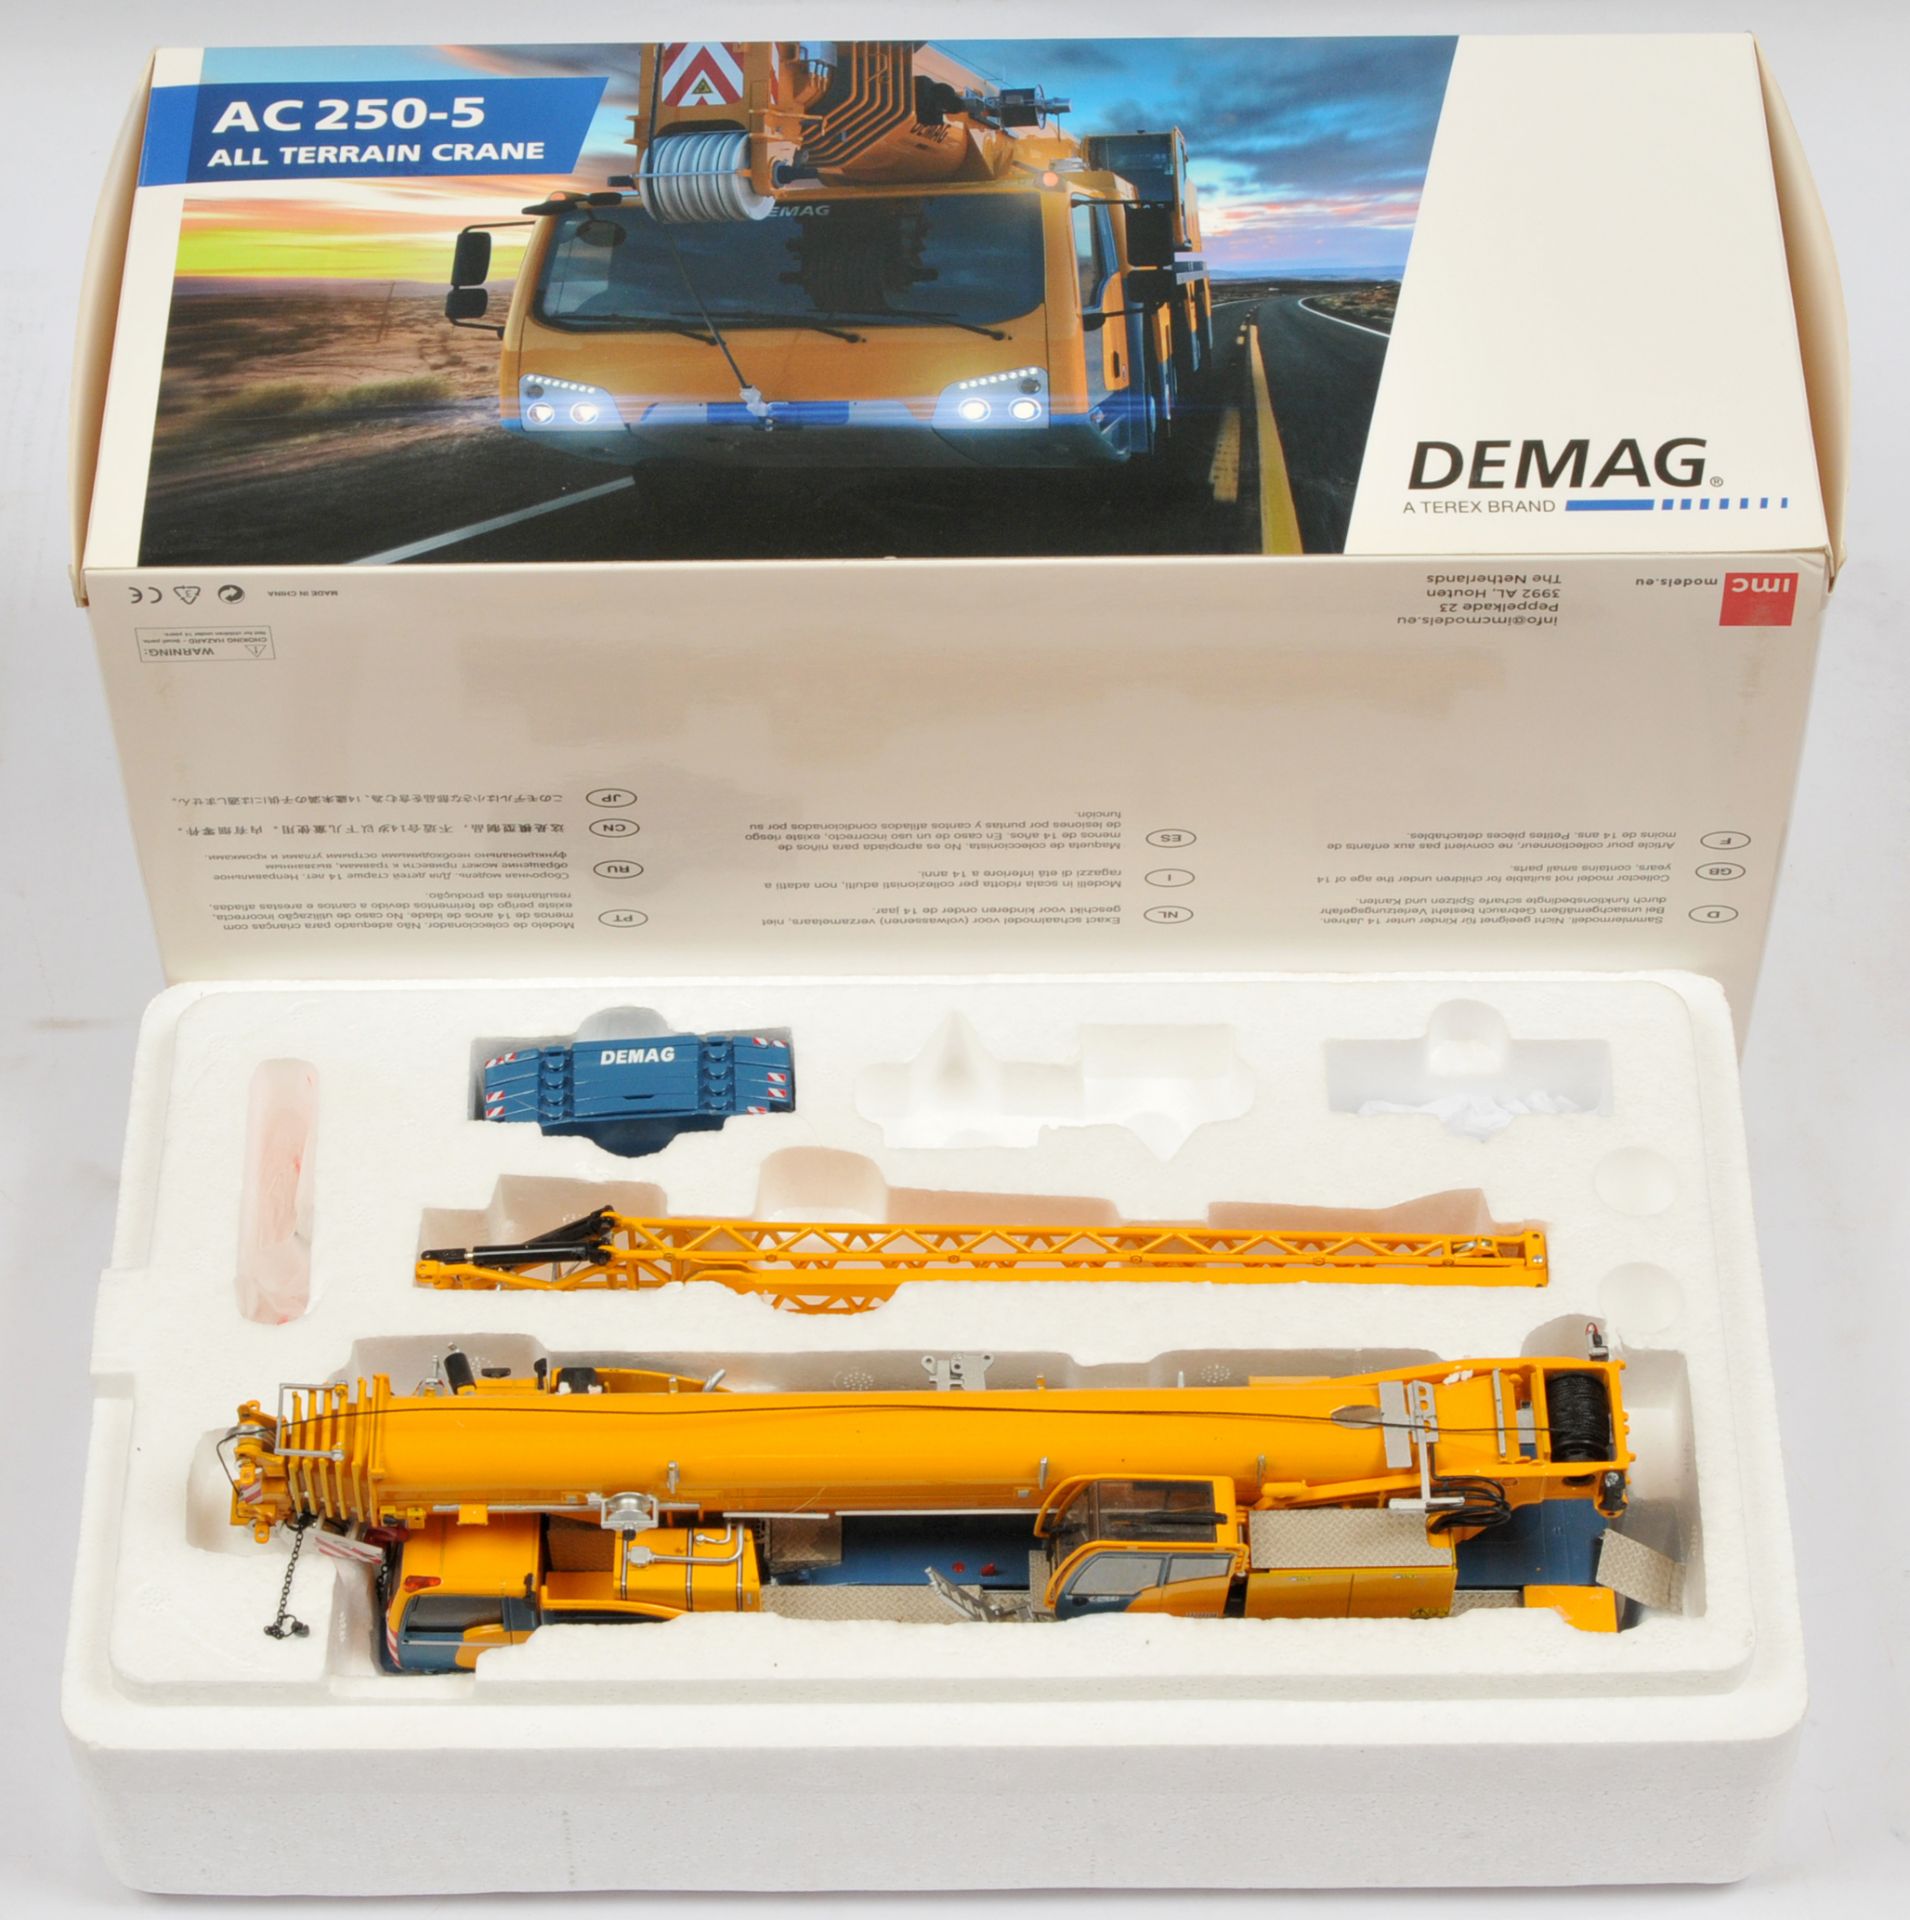 IMC  Models (1/50th) Demag AC 250-5 Mobile Crane - yellow and blue - Excellent (contents not chec...